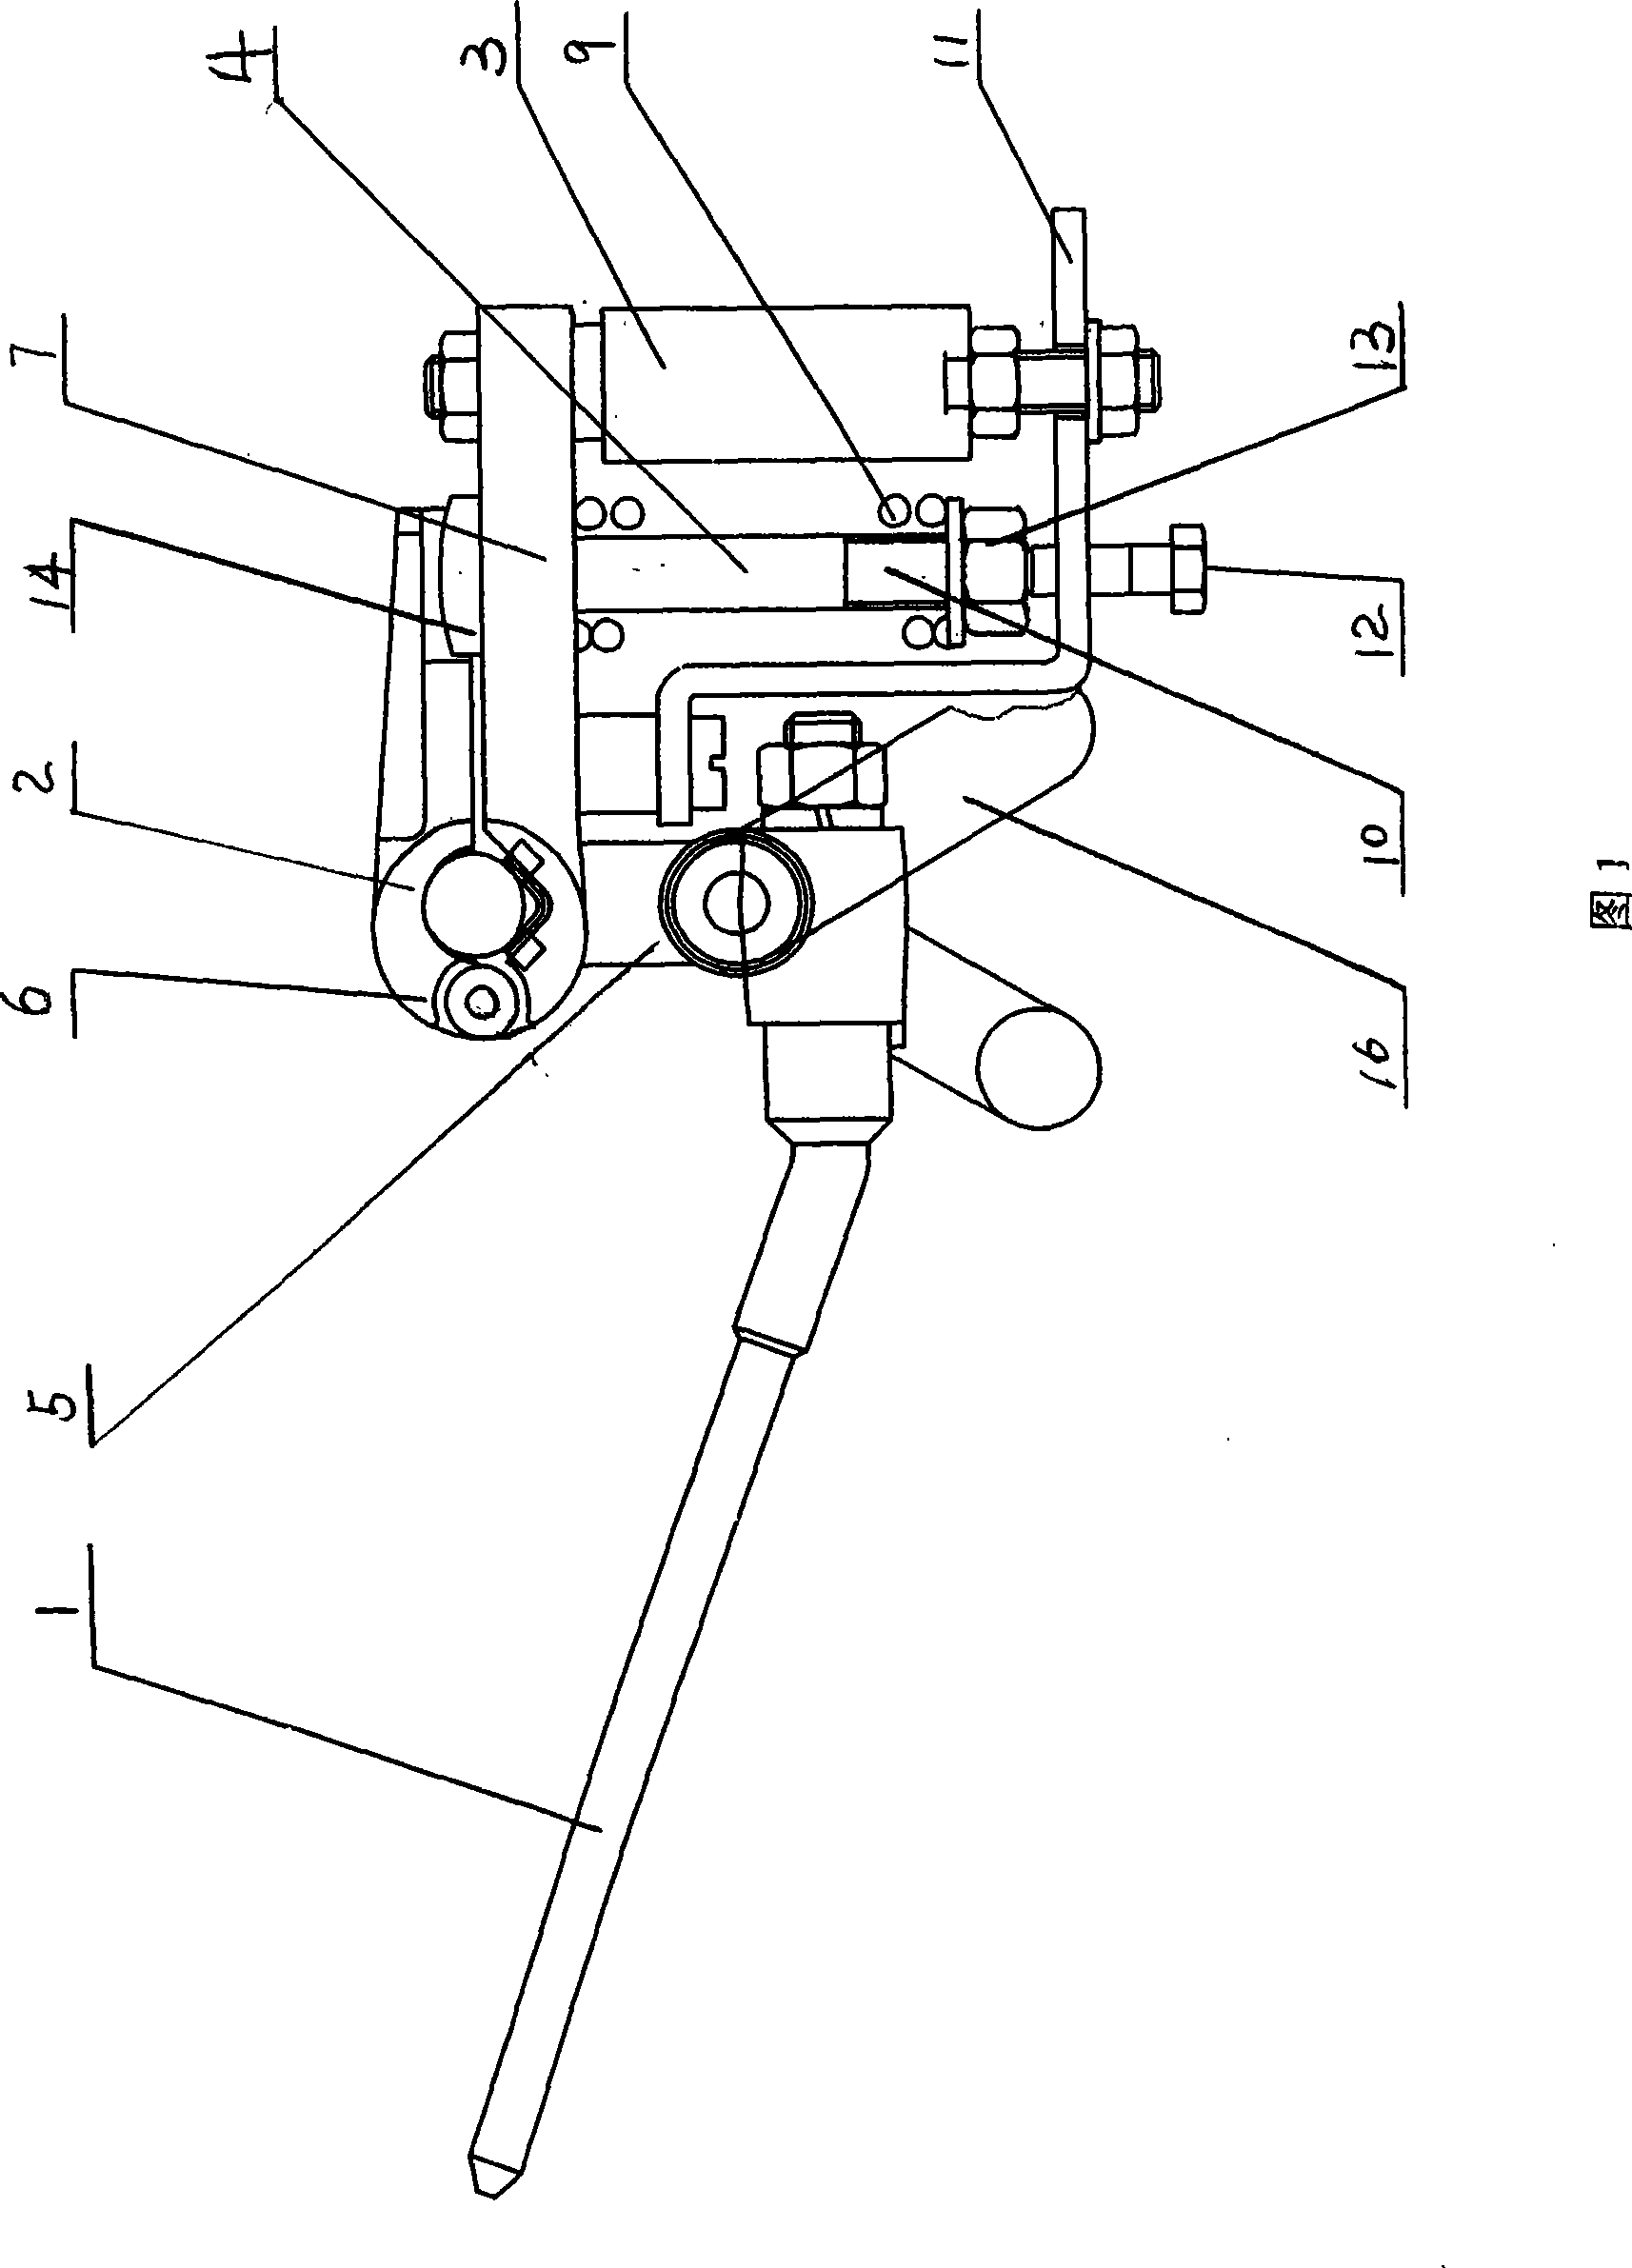 Lightning arrester against winding shock and mounting tool